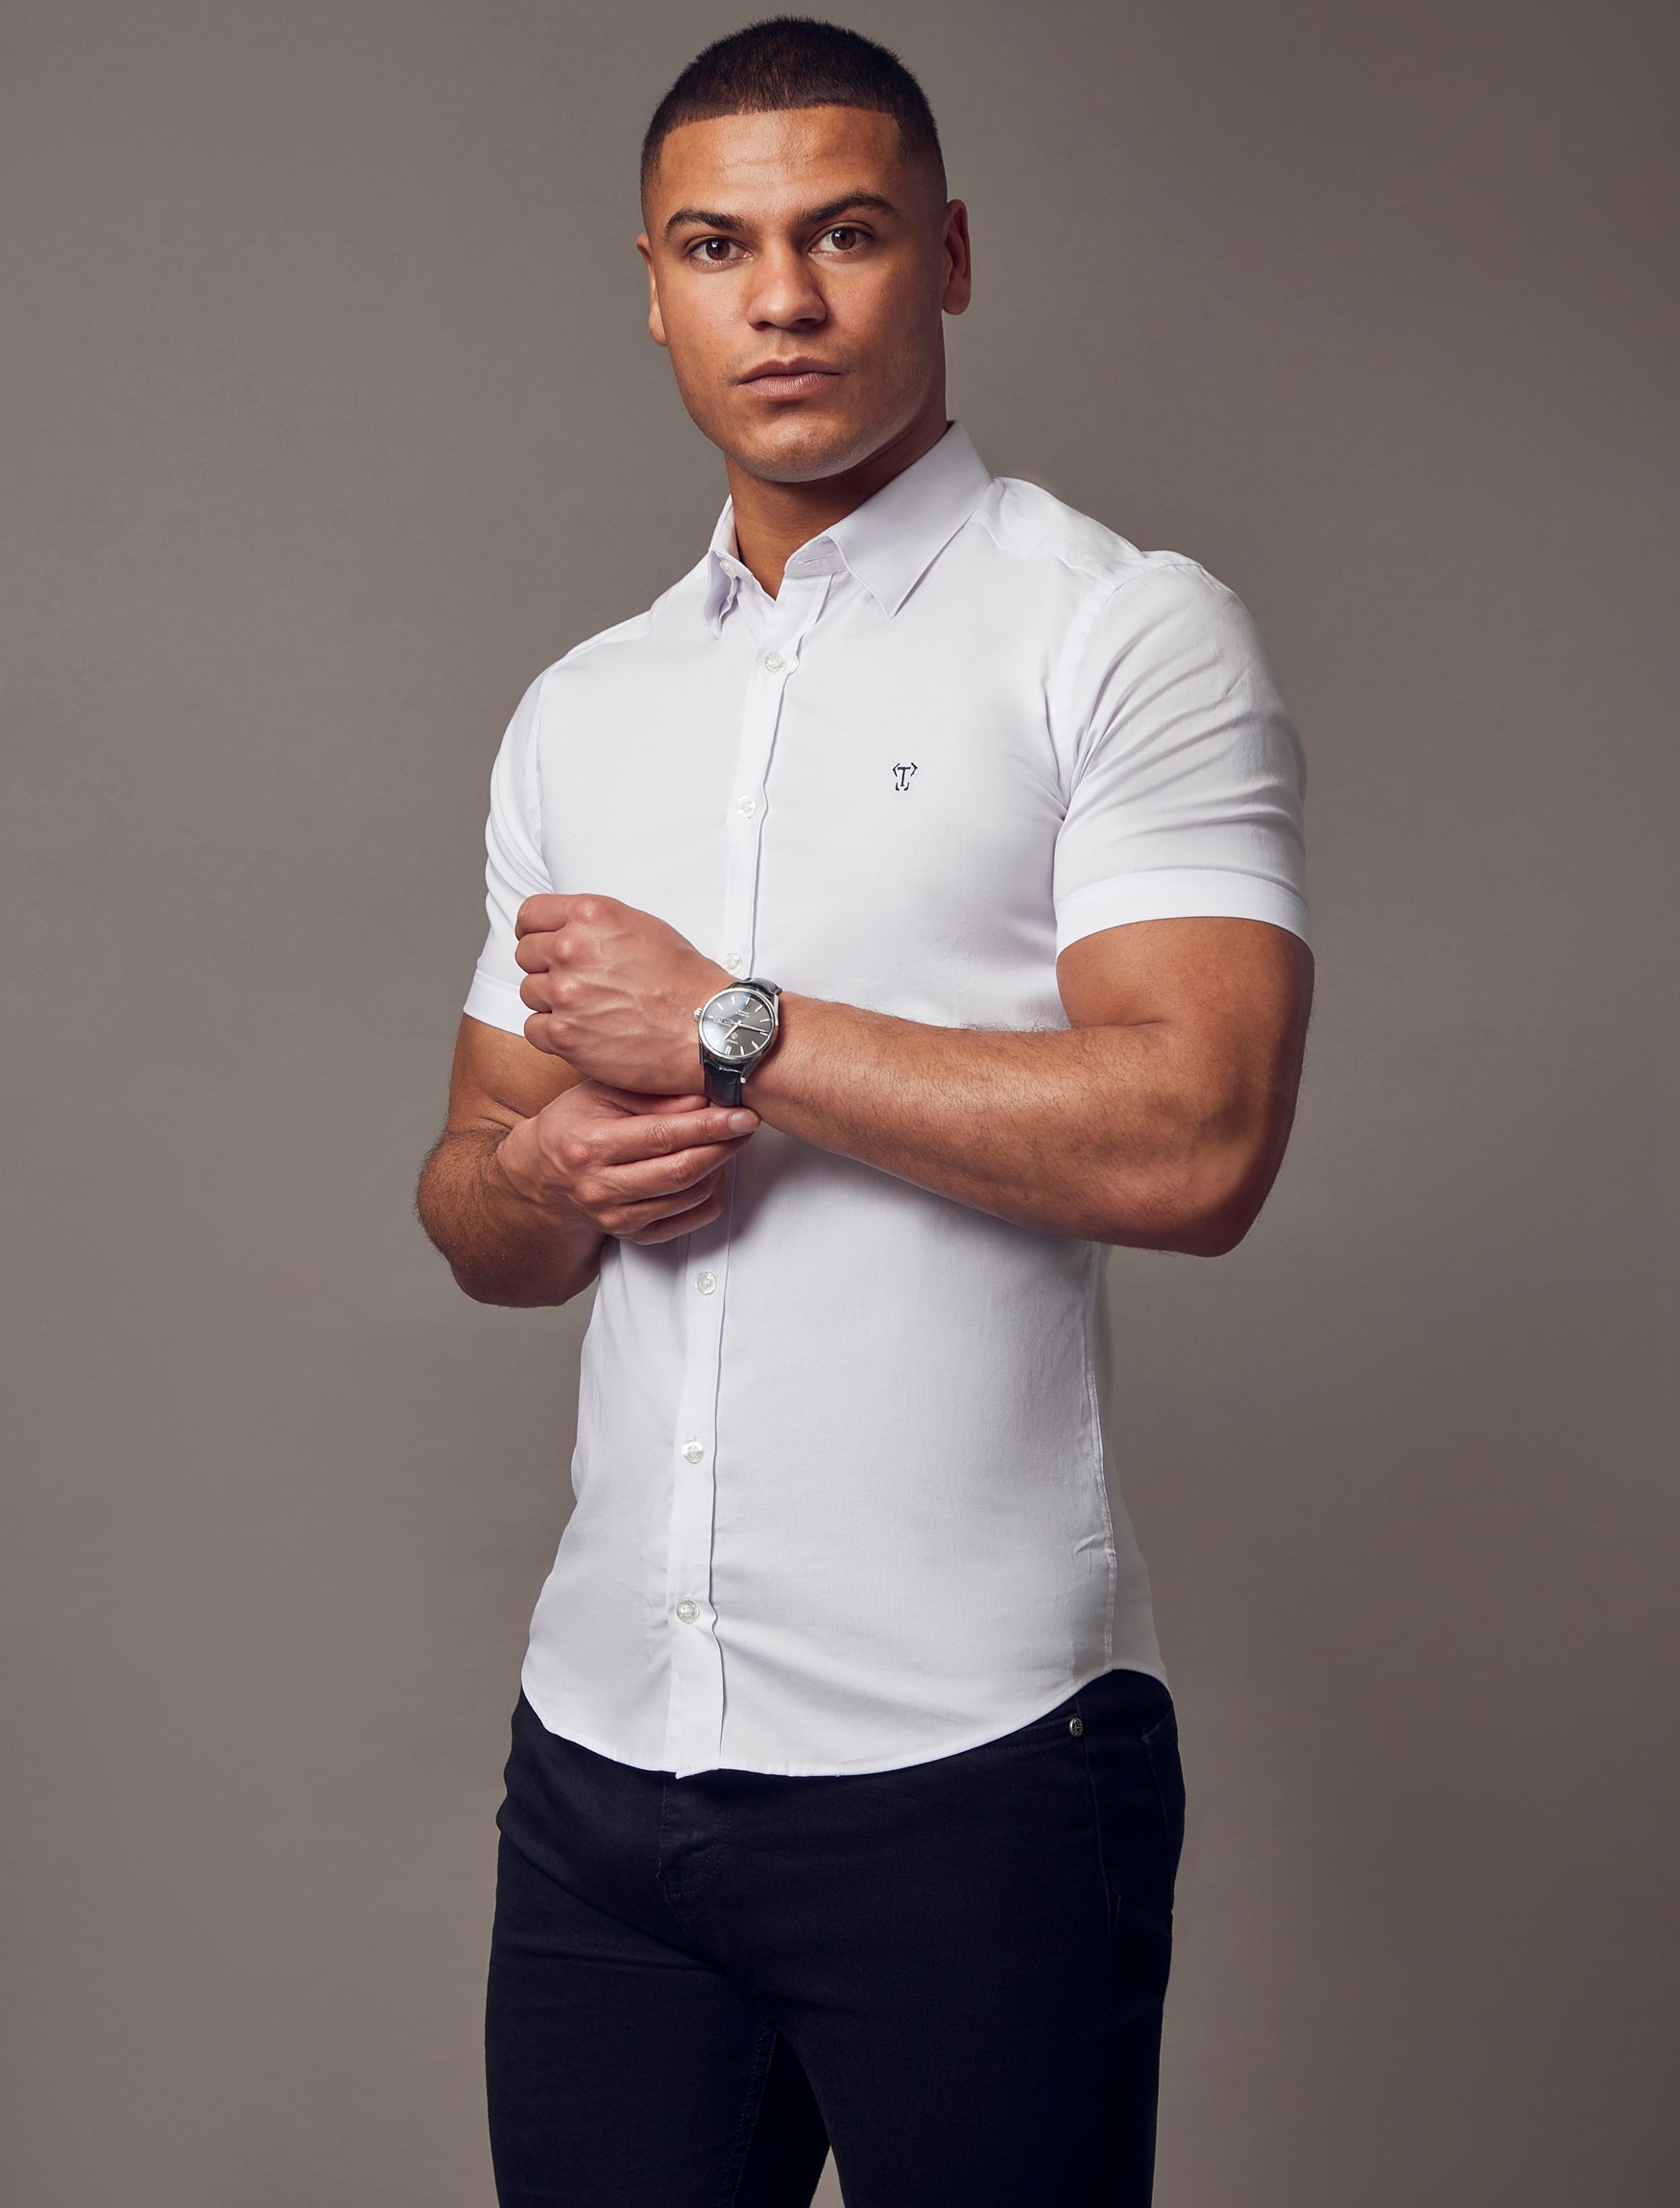 Spandex Tight Long-Sleeve Shirt for Men - White Size M